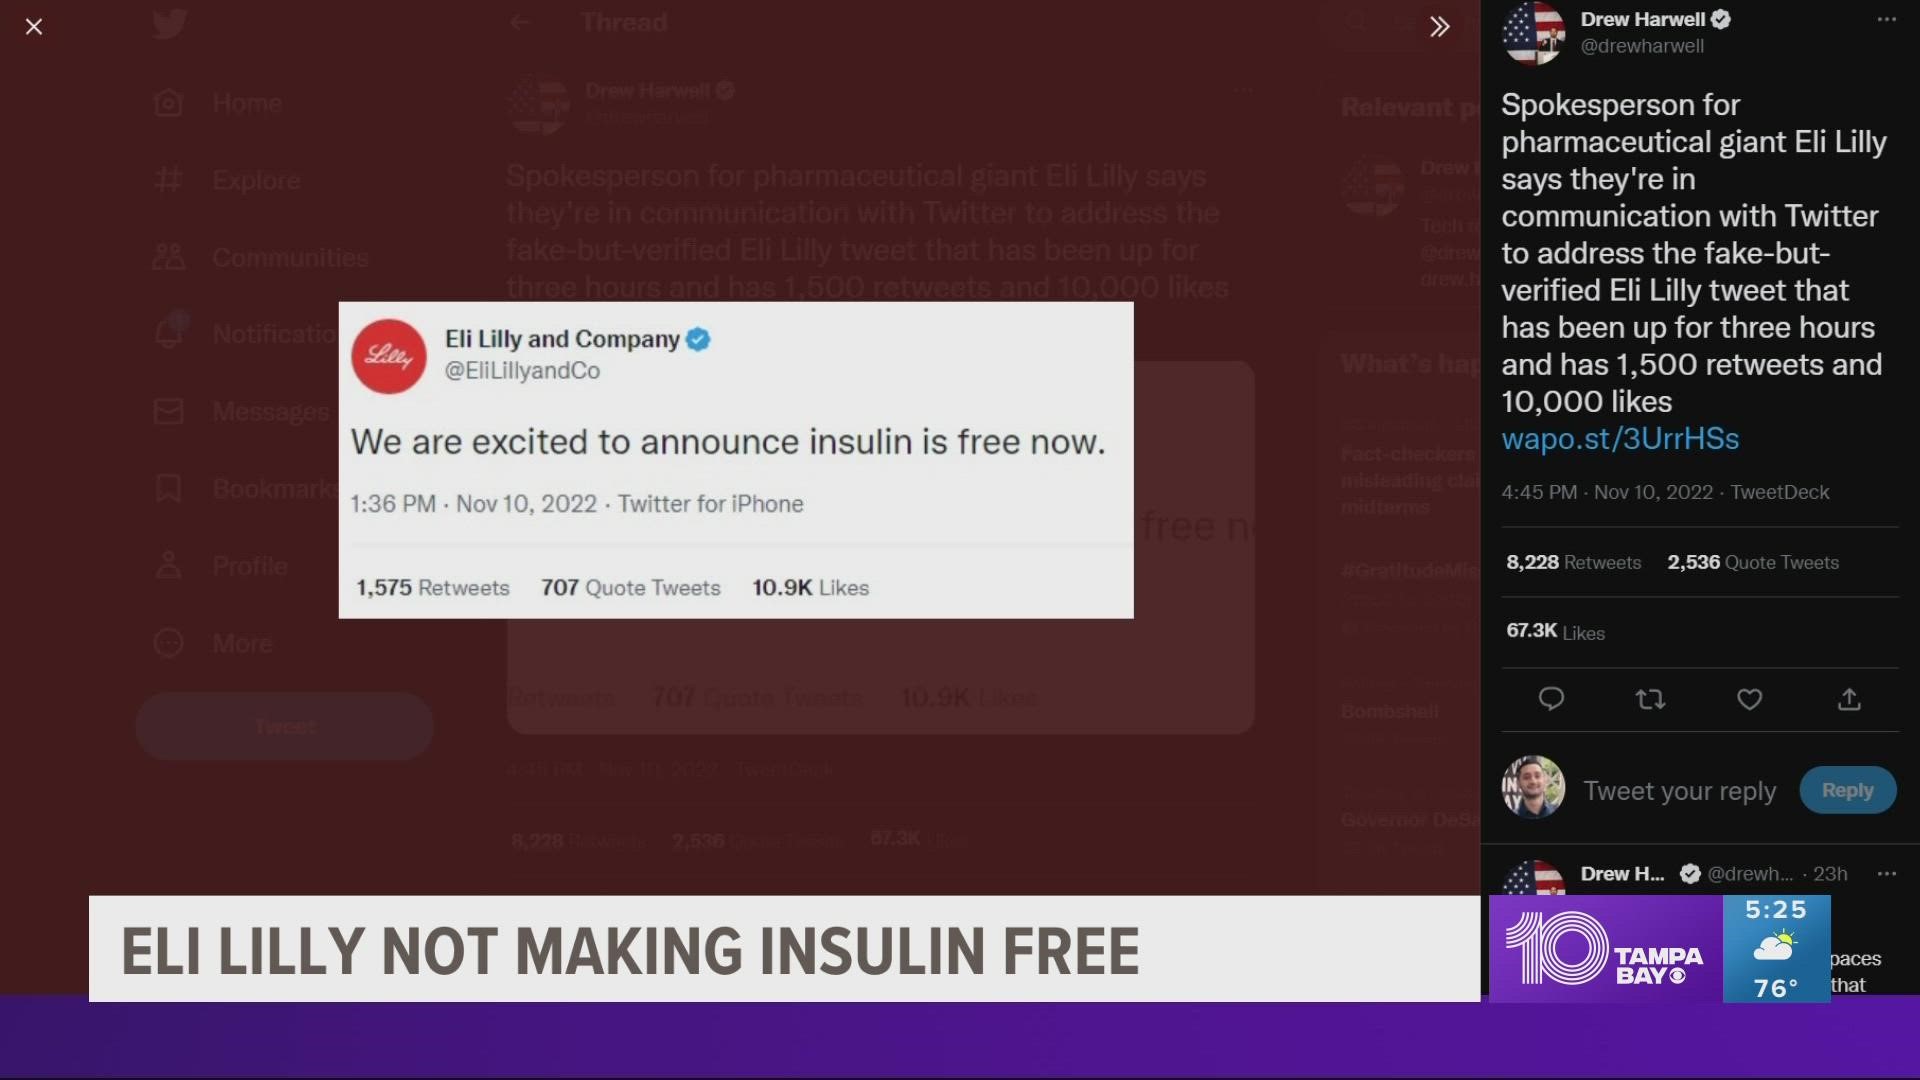 An account impersonating Eli Lilly used the new subscription-based Twitter Blue checkmark to make a fake tweet about free insulin.